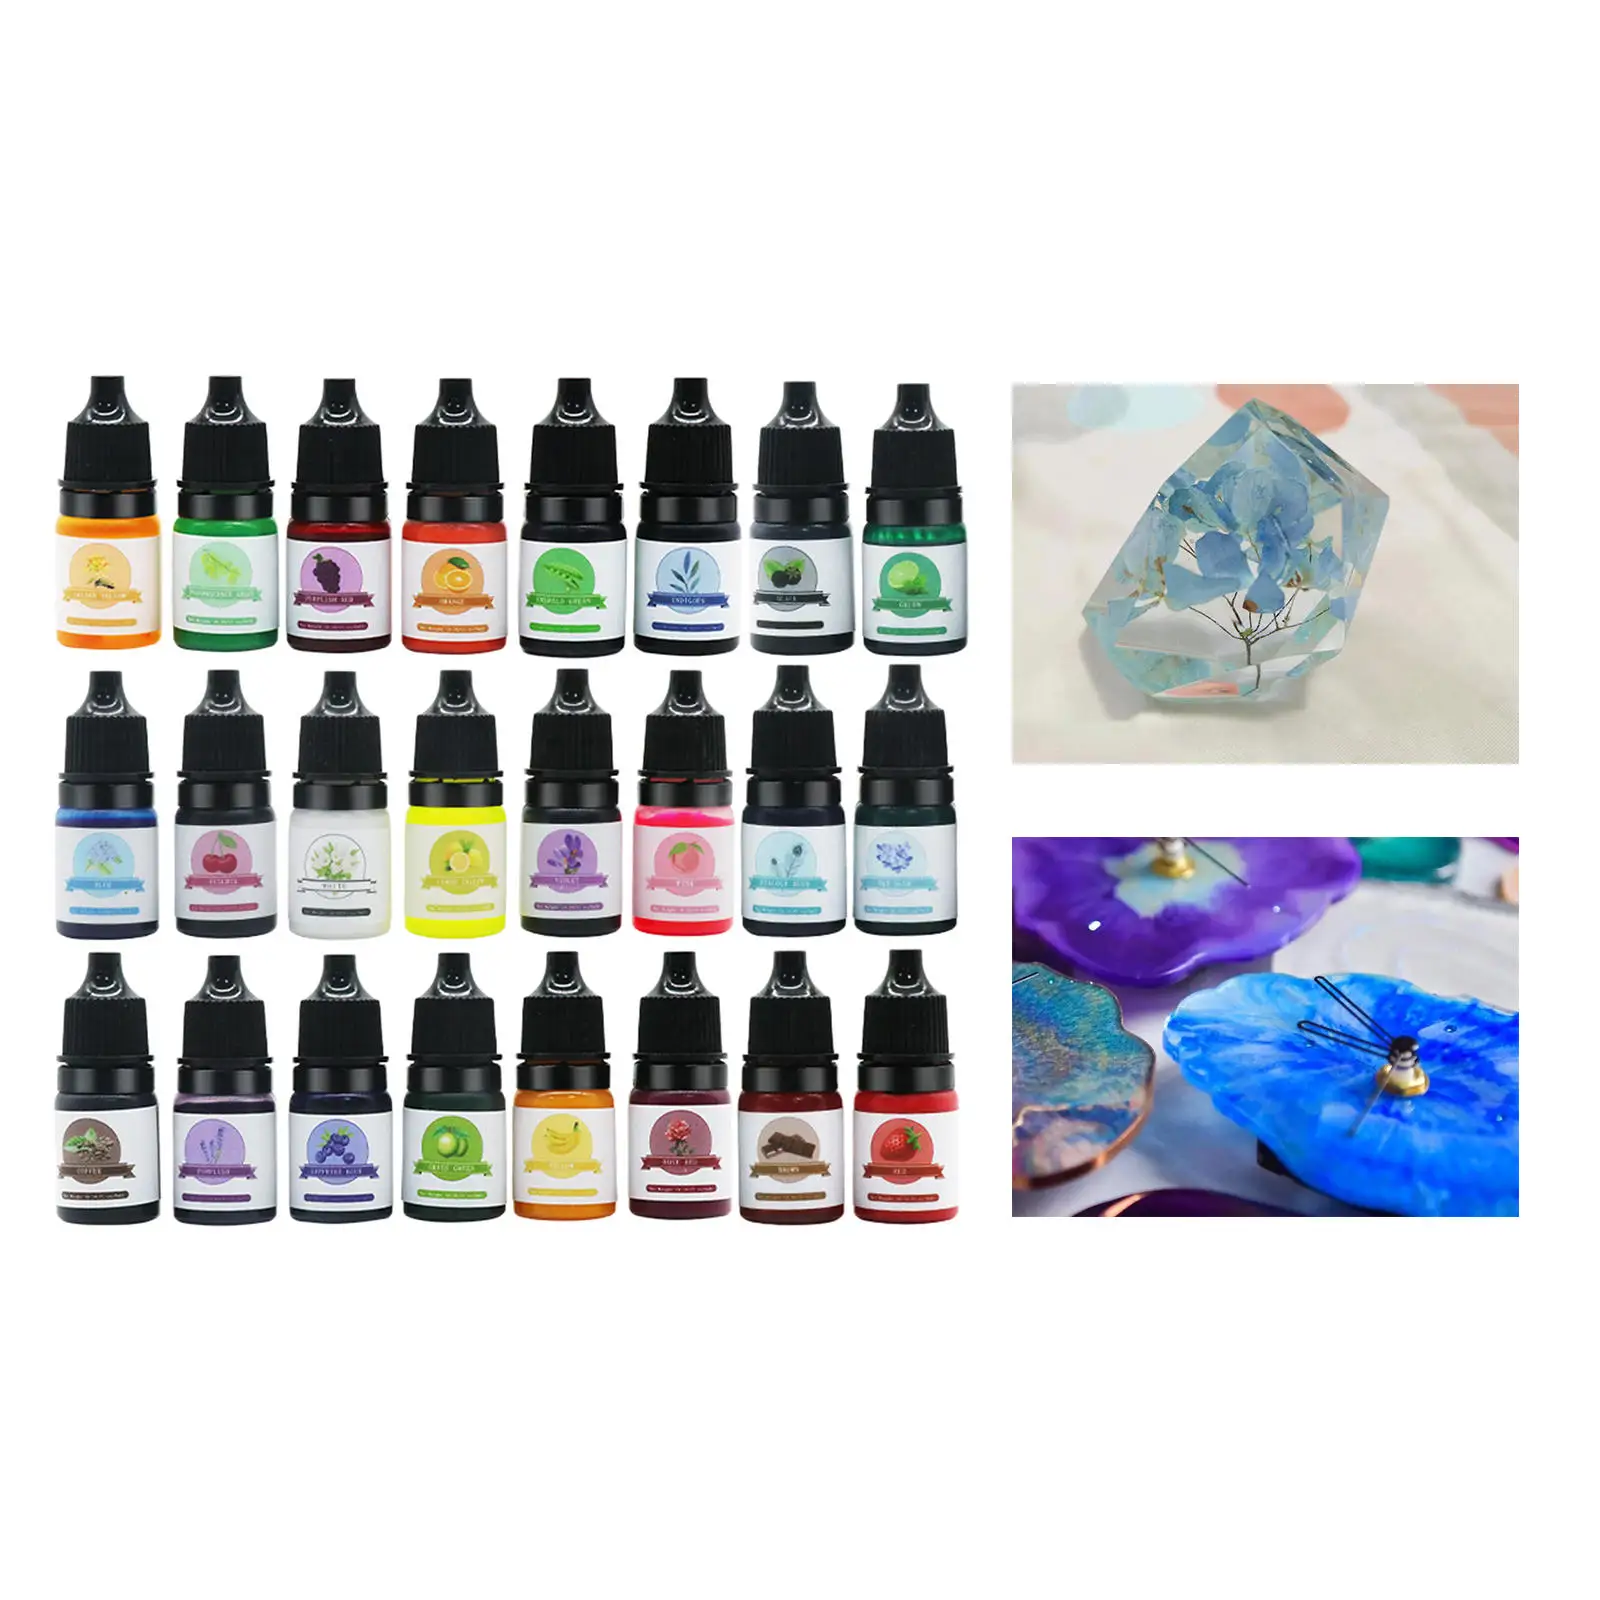 24 Color Epoxy Resin Pigment Jewelry Making Concentrated Resin Coloring Dye Colorant Art Pigment Liquid for DIY Crafts Paint